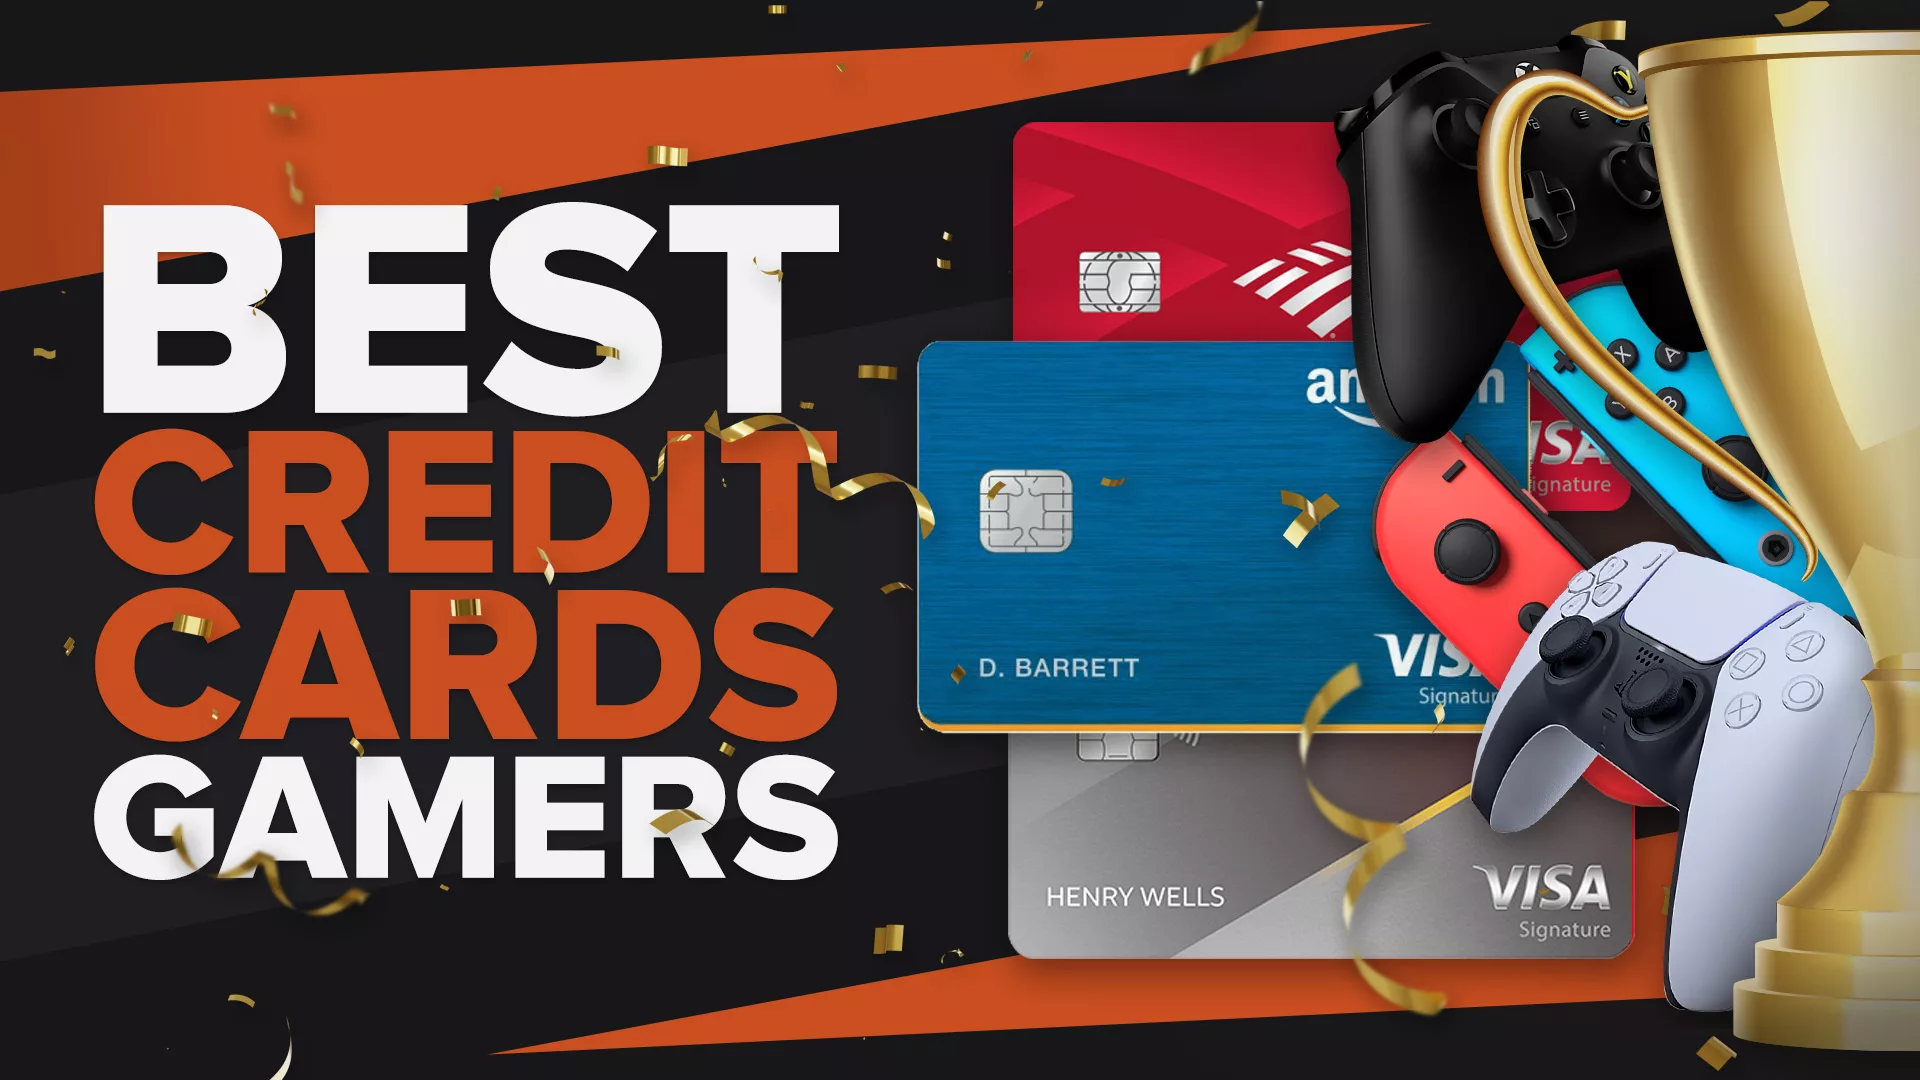 Best Credit Cards for Gamers [All Tested]